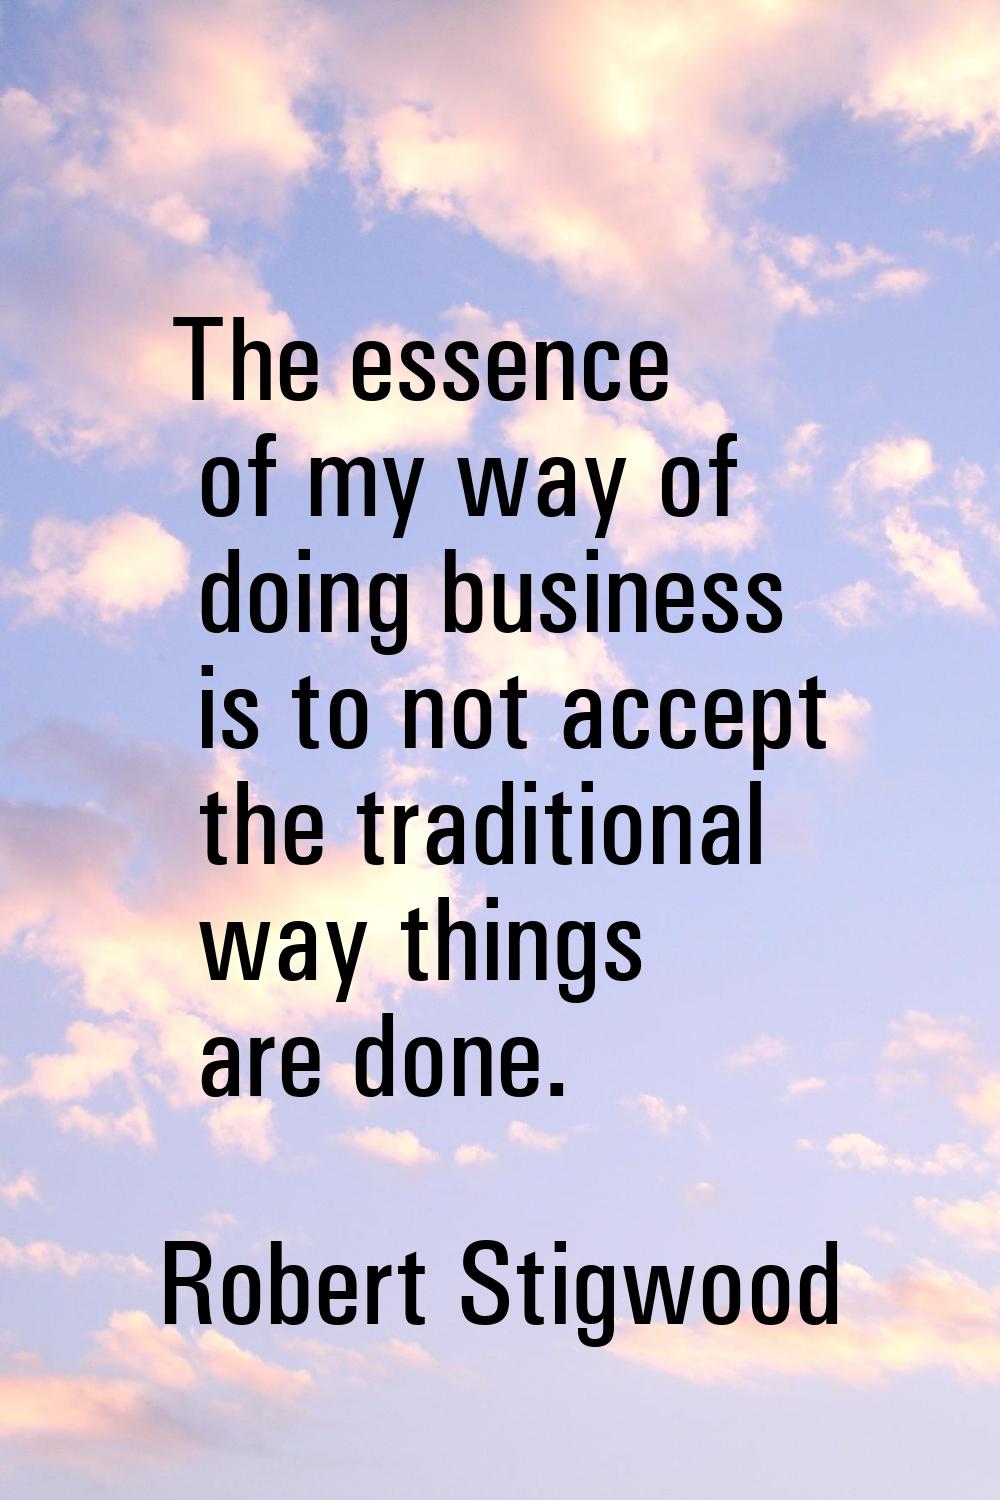 The essence of my way of doing business is to not accept the traditional way things are done.